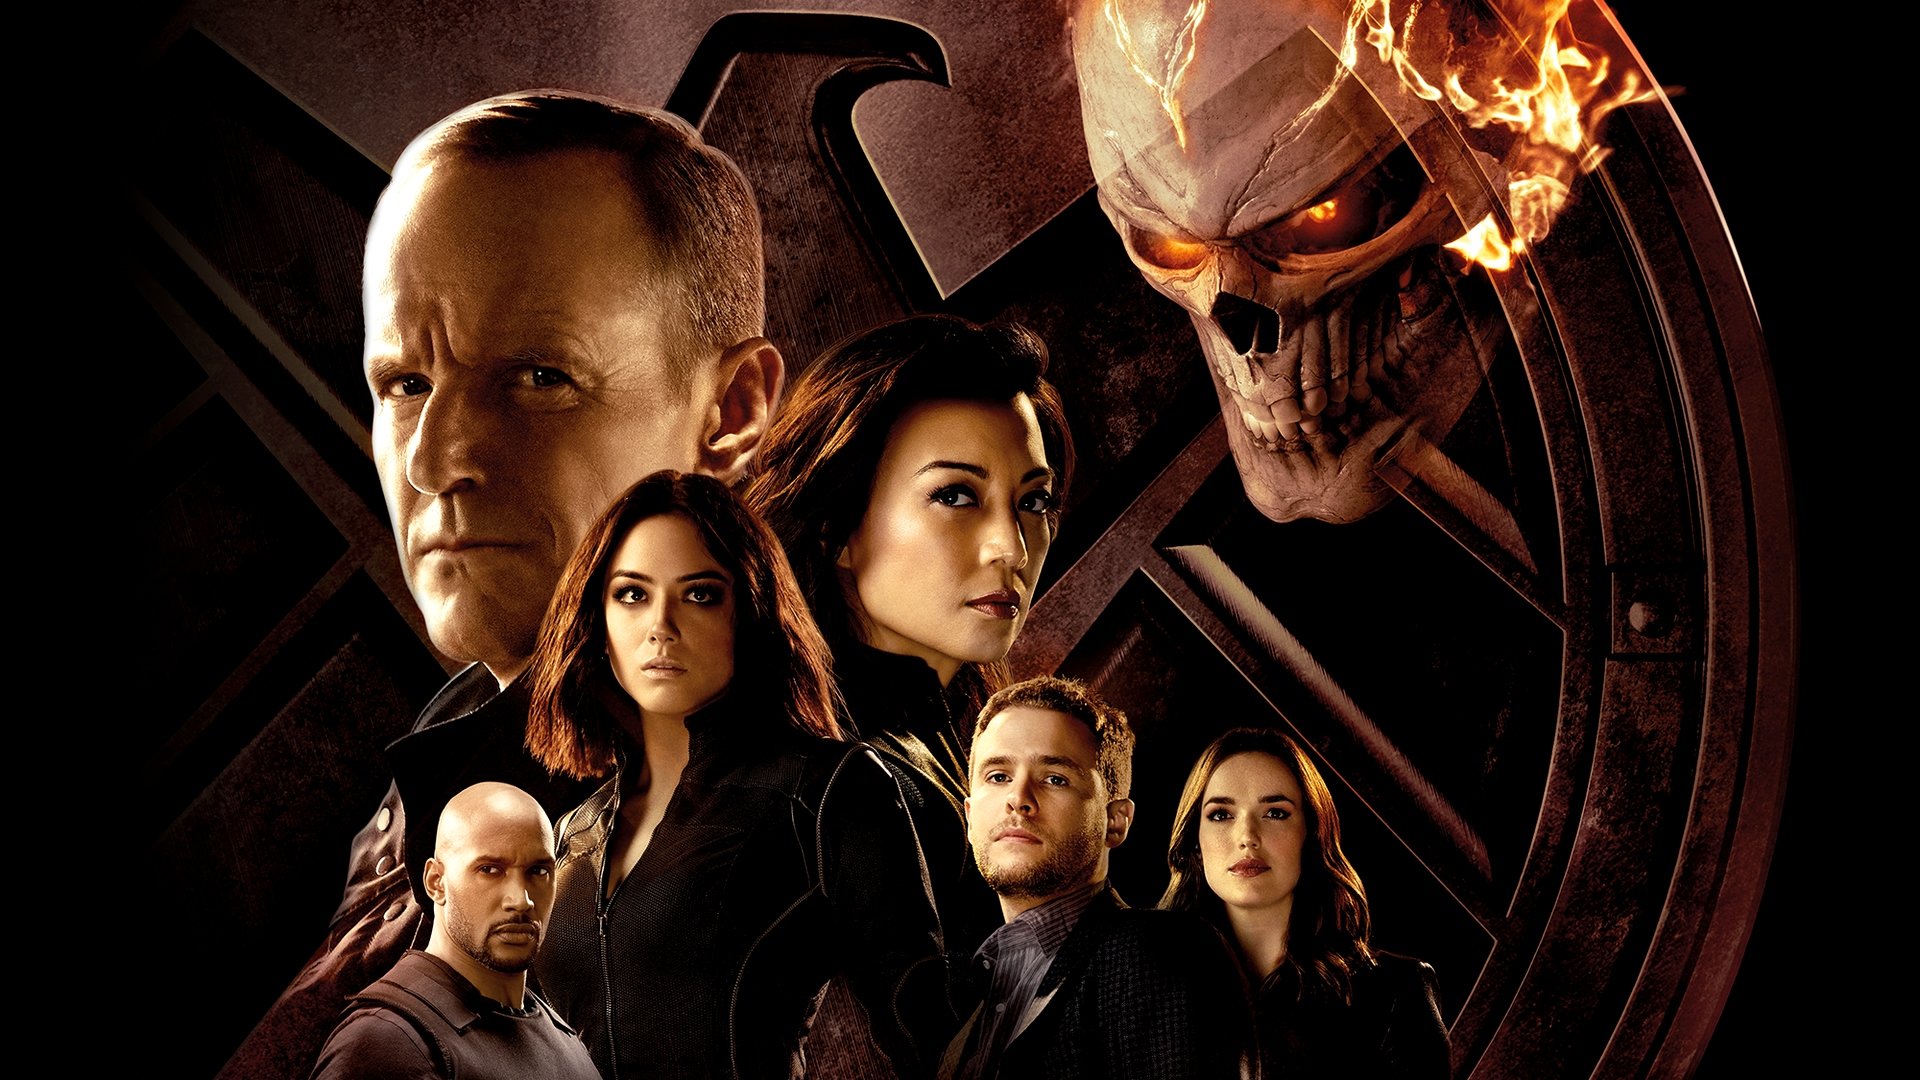 Marvel S Agents Of Shield Wallpapers 19x1080 Full Hd 1080p Desktop Backgrounds